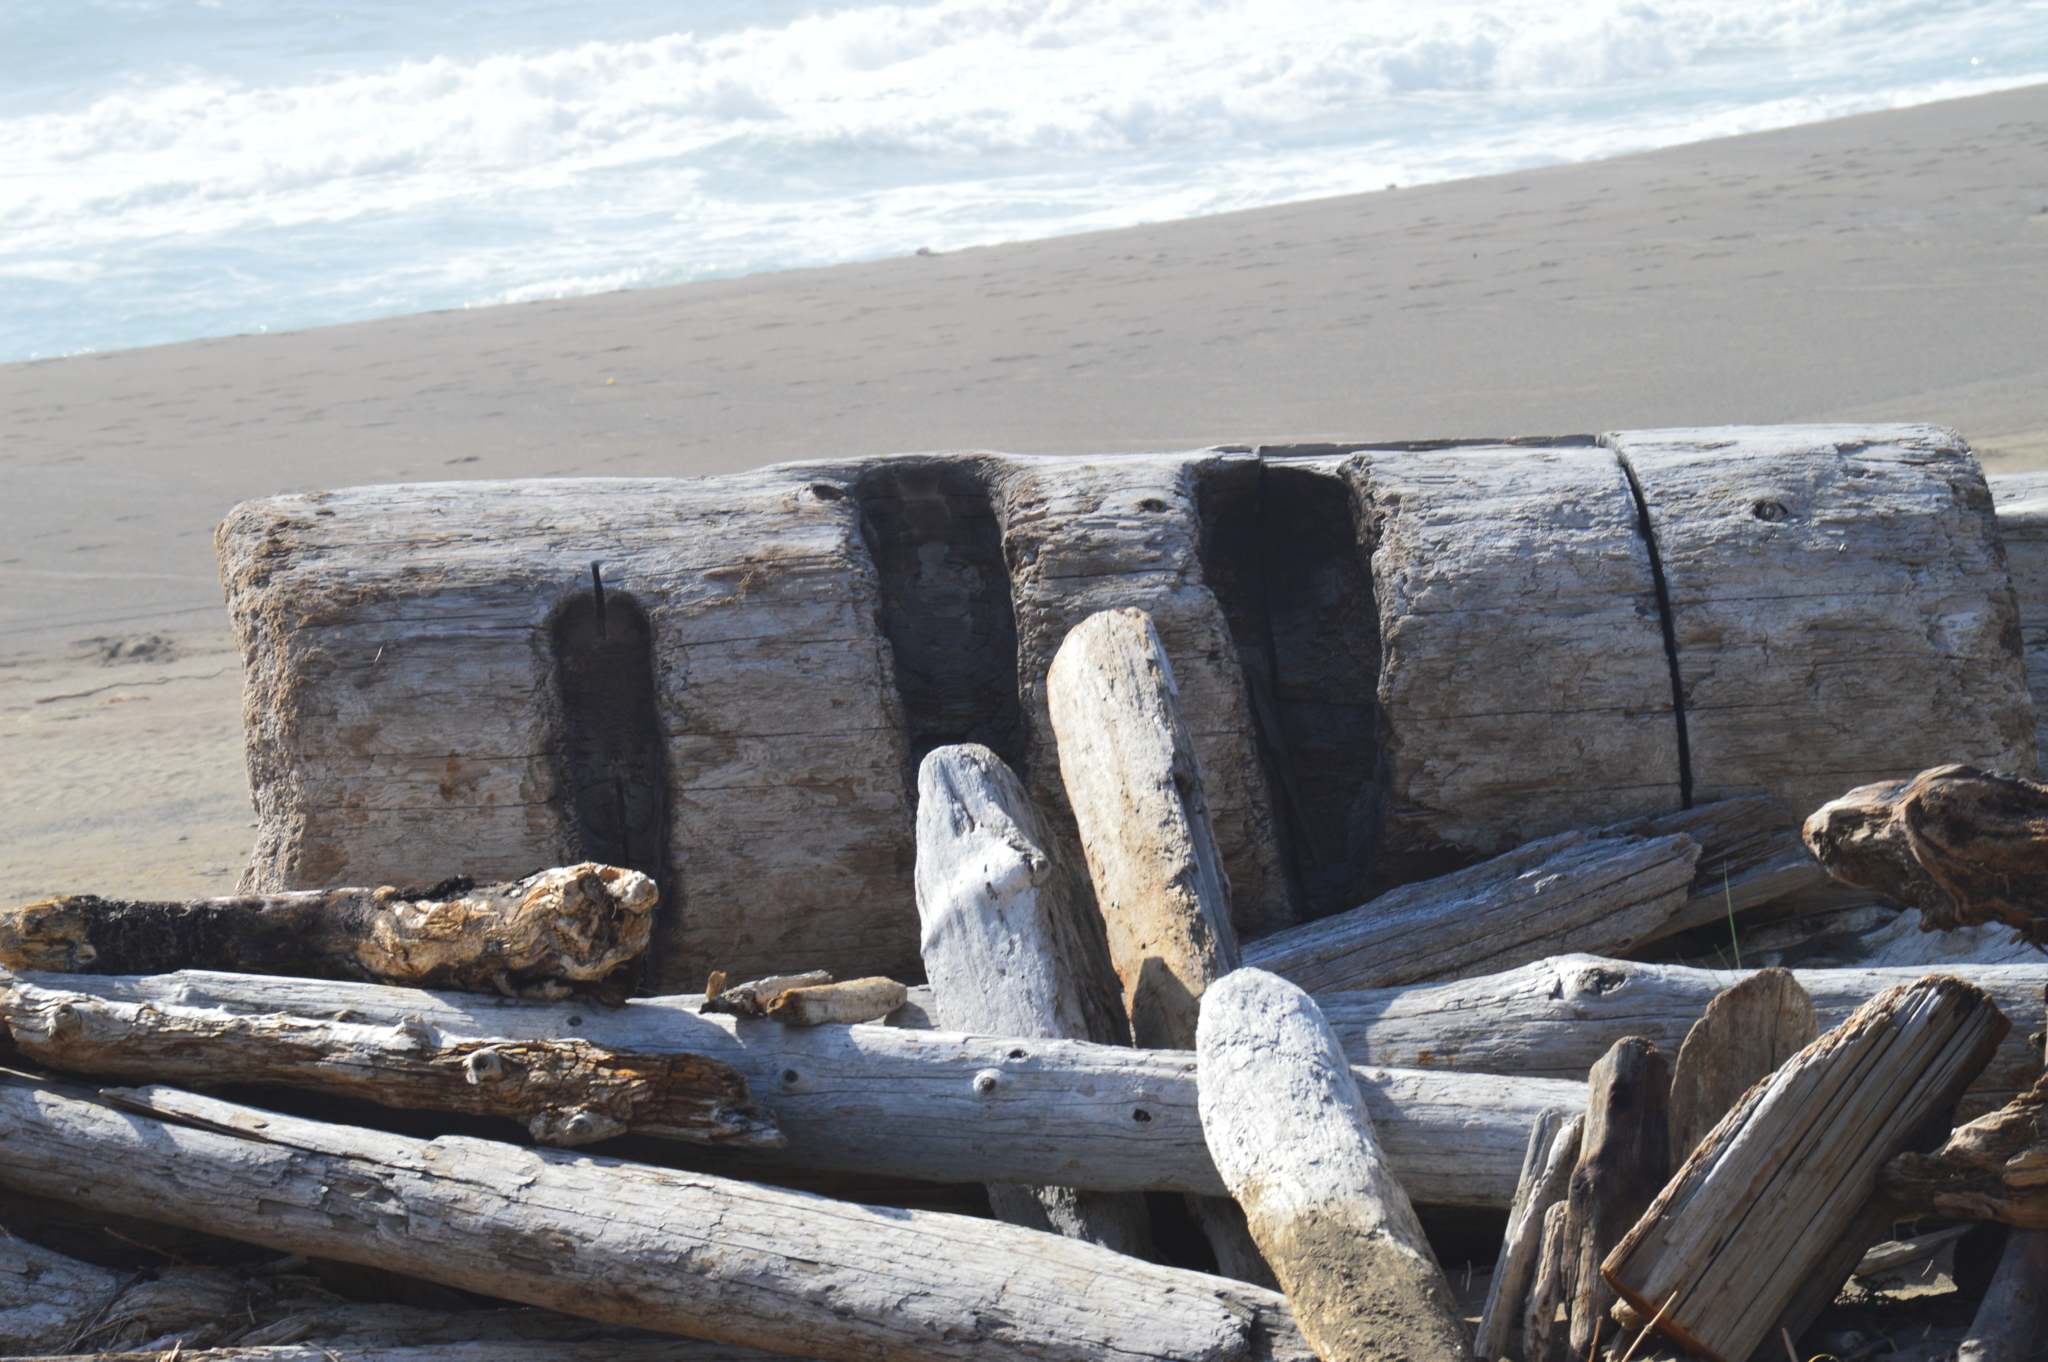 Pile of various sized logs that have washed up on Irish Beach in California